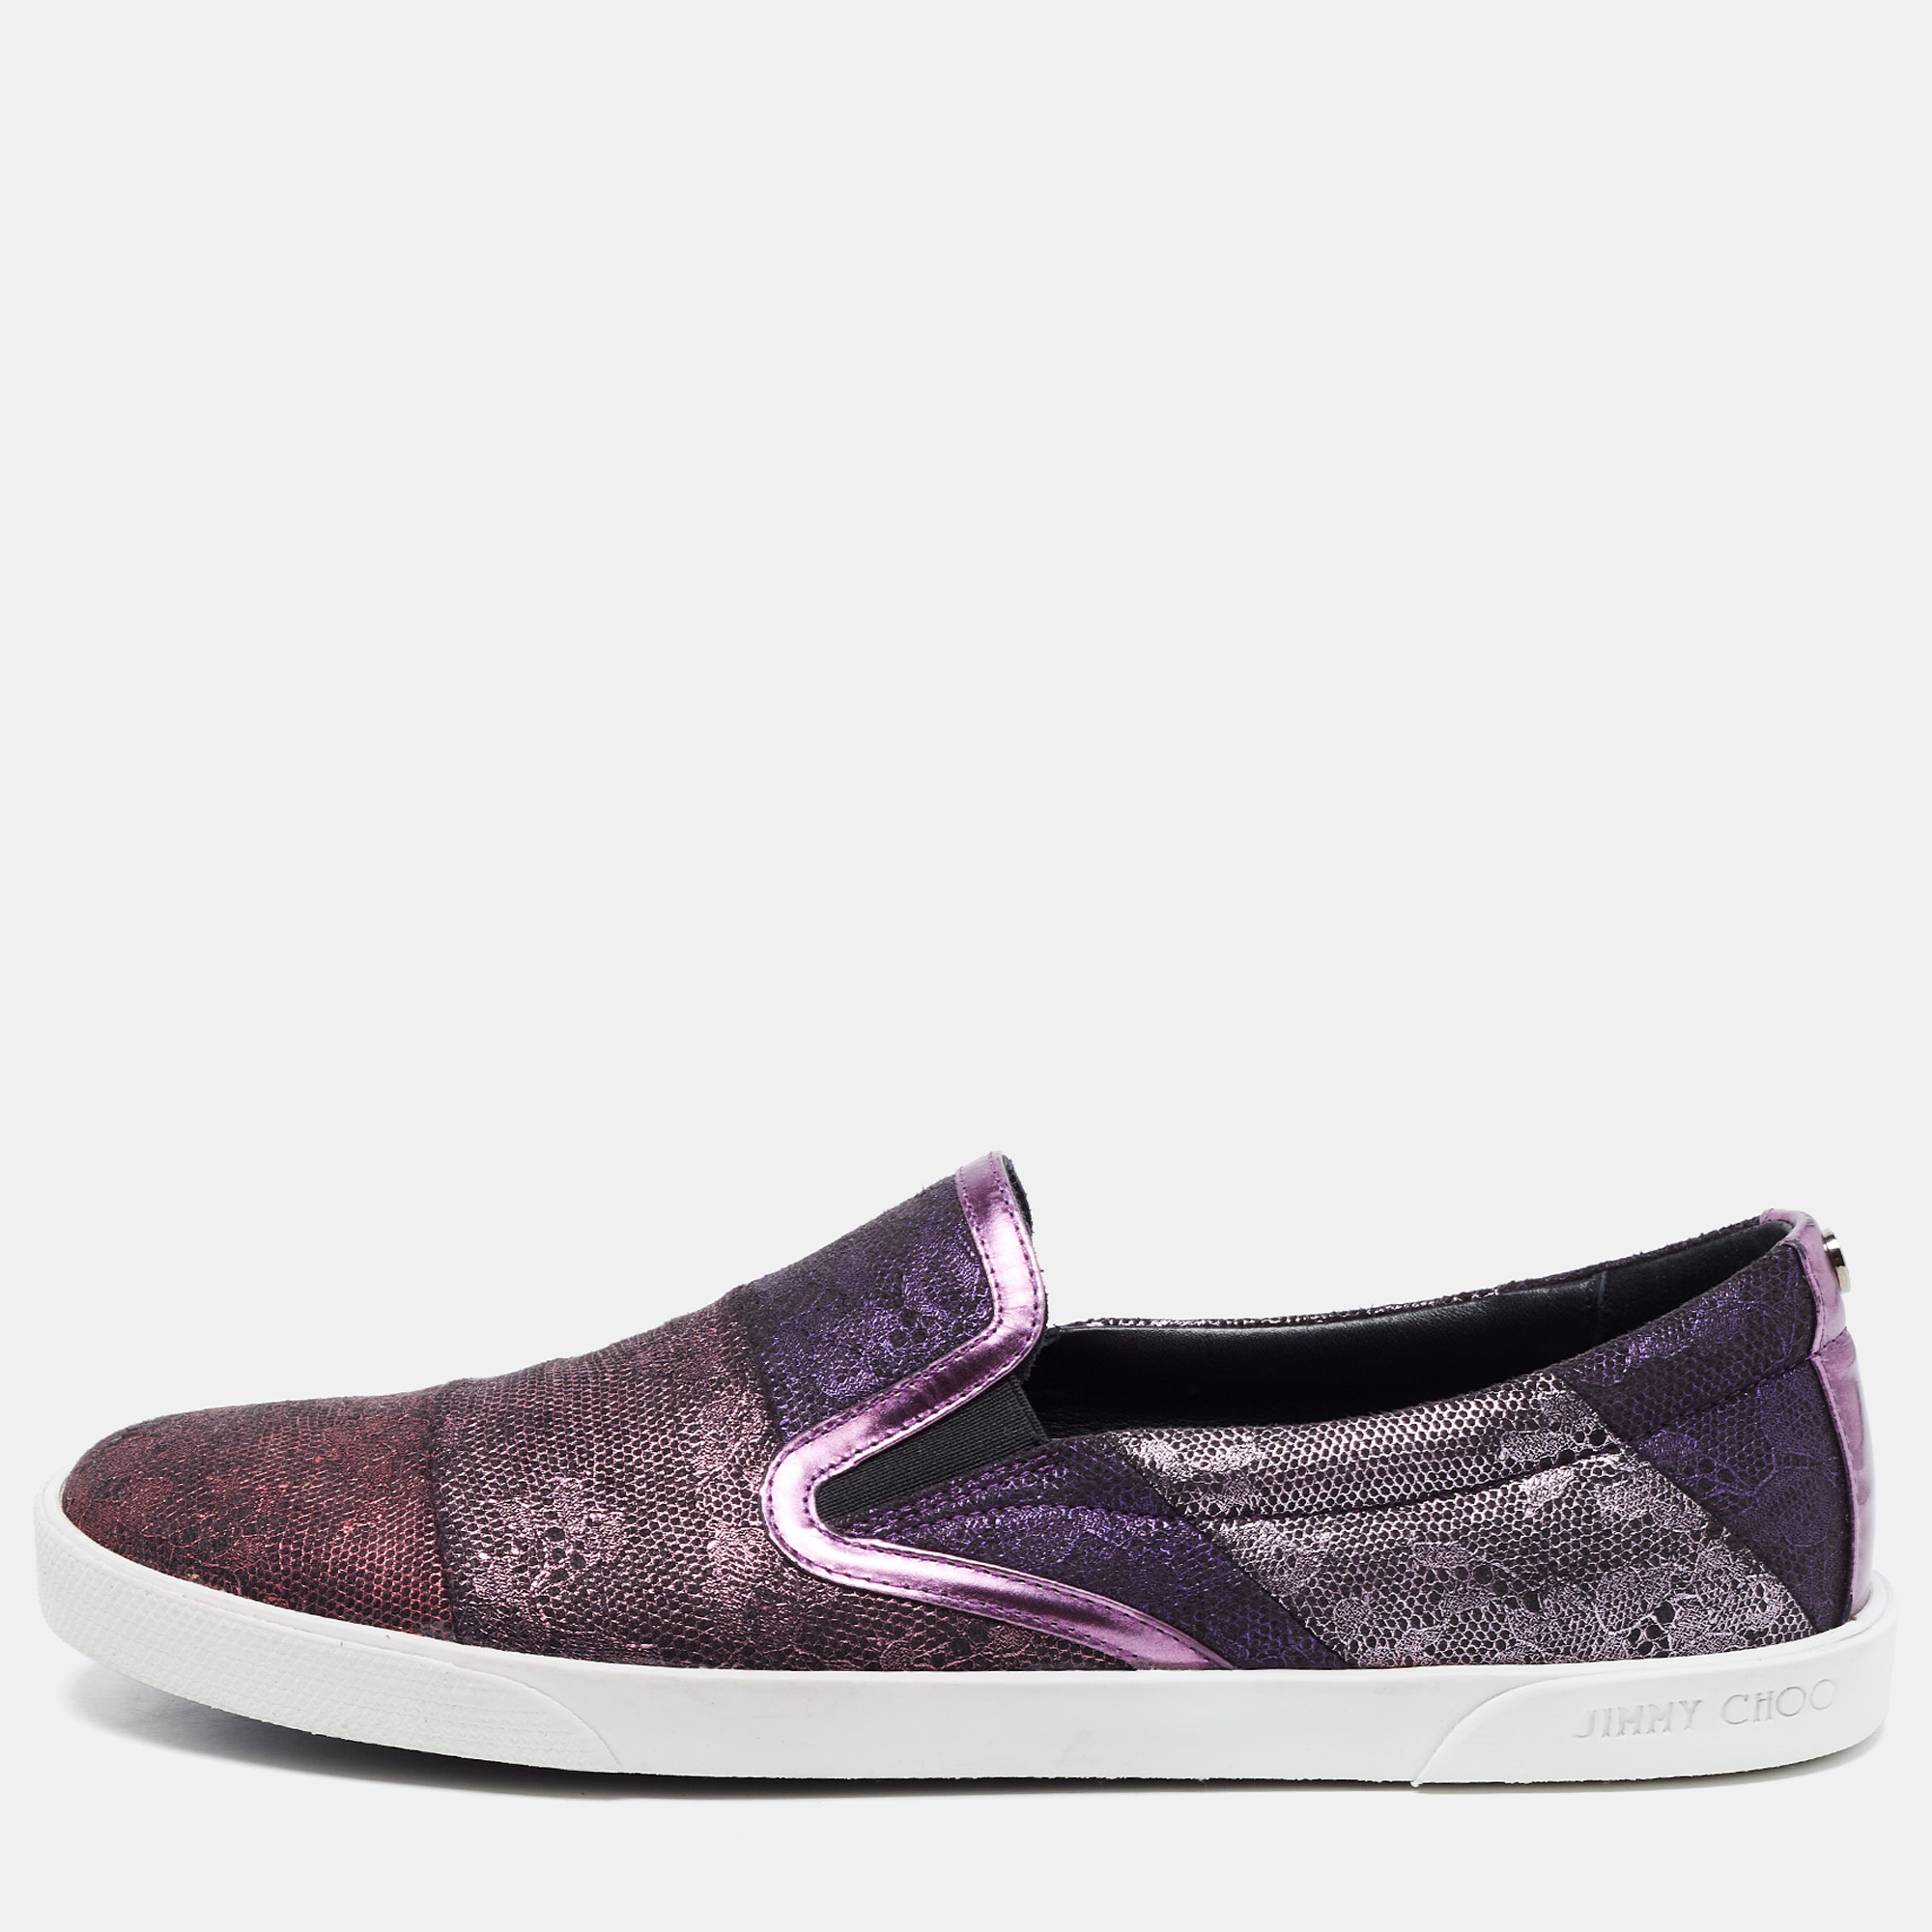 Pre-owned Jimmy Choo Metallic Purple Lace Embroidered Leather Demi Slip On Sneakers Size 40